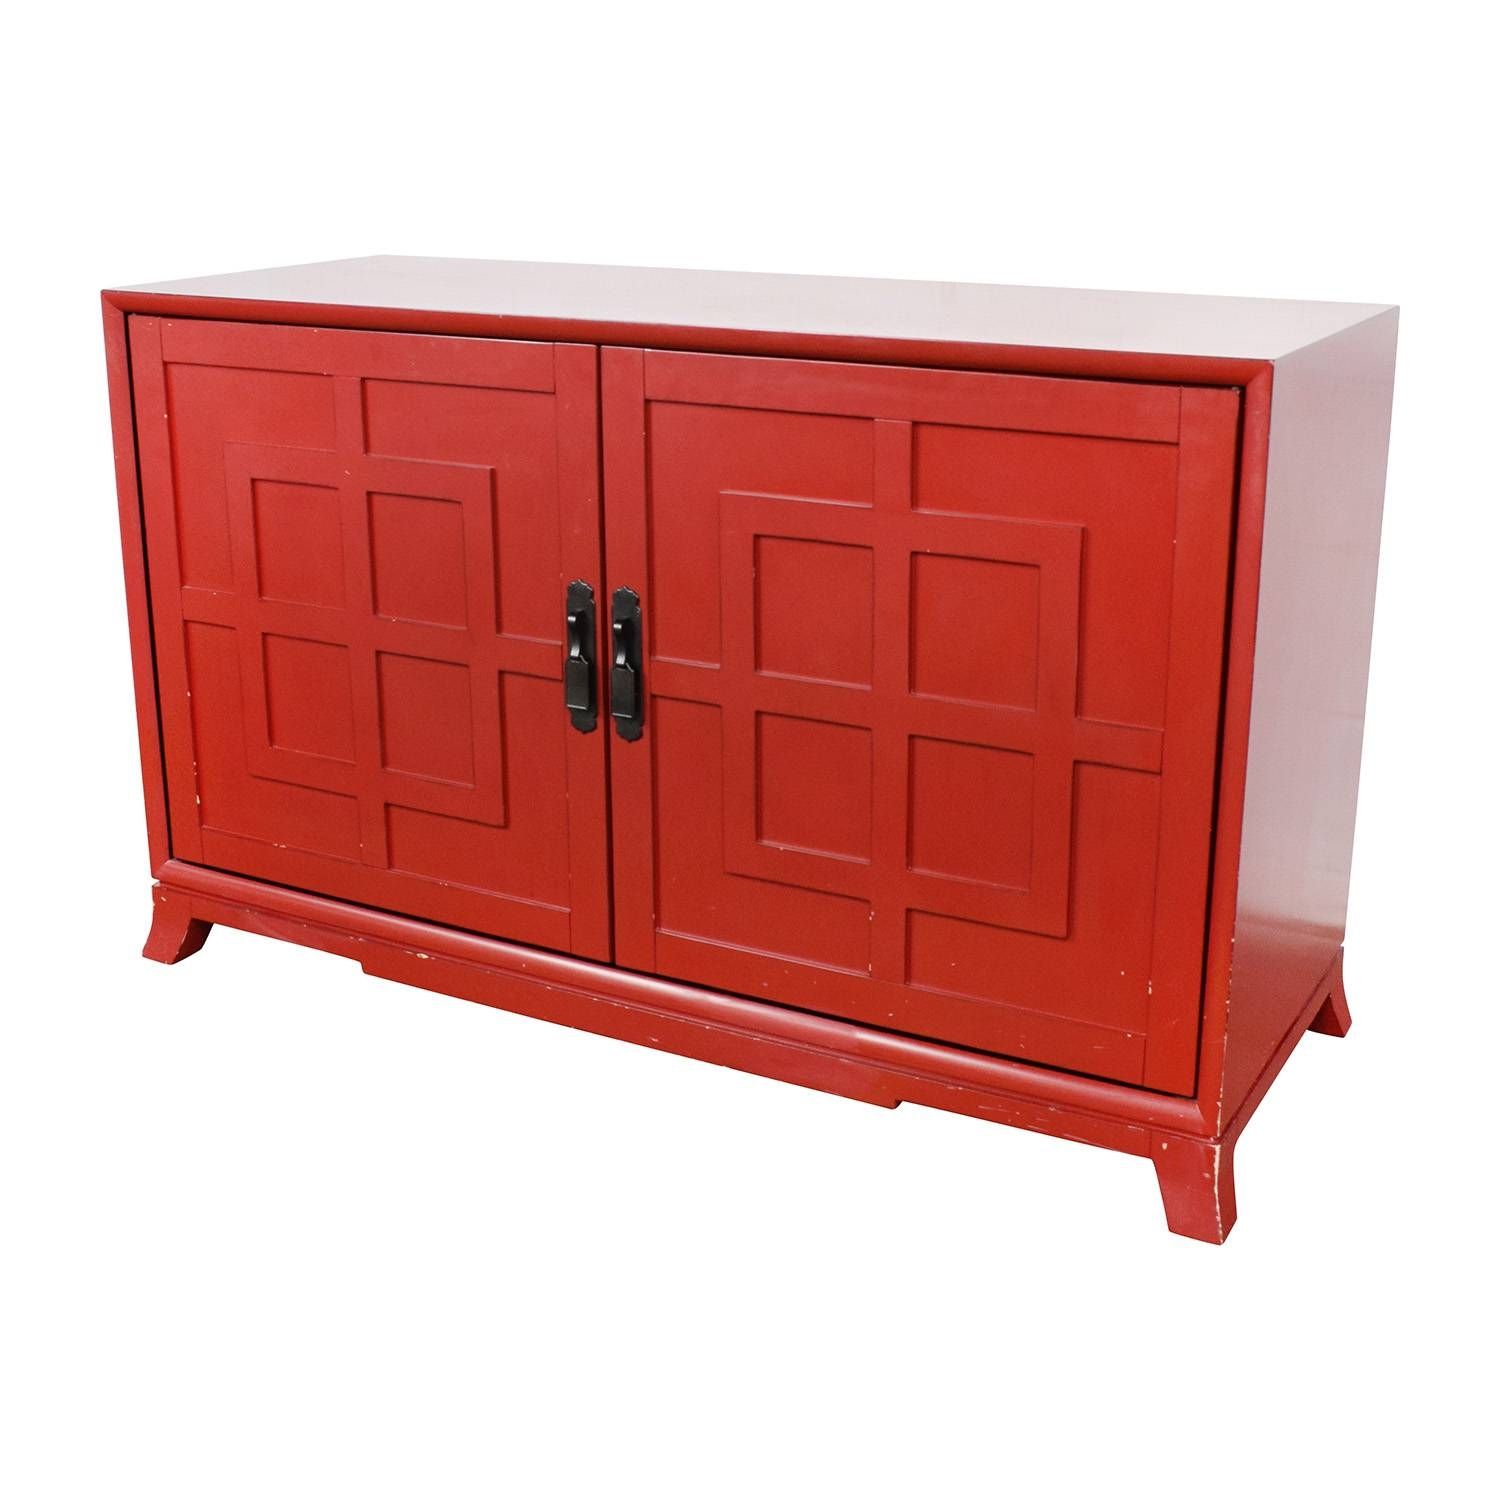 83% Off – Crate And Barrel Crate & Barrel Red Media Storage / Storage In Current Crate And Barrel Sideboards (View 7 of 15)